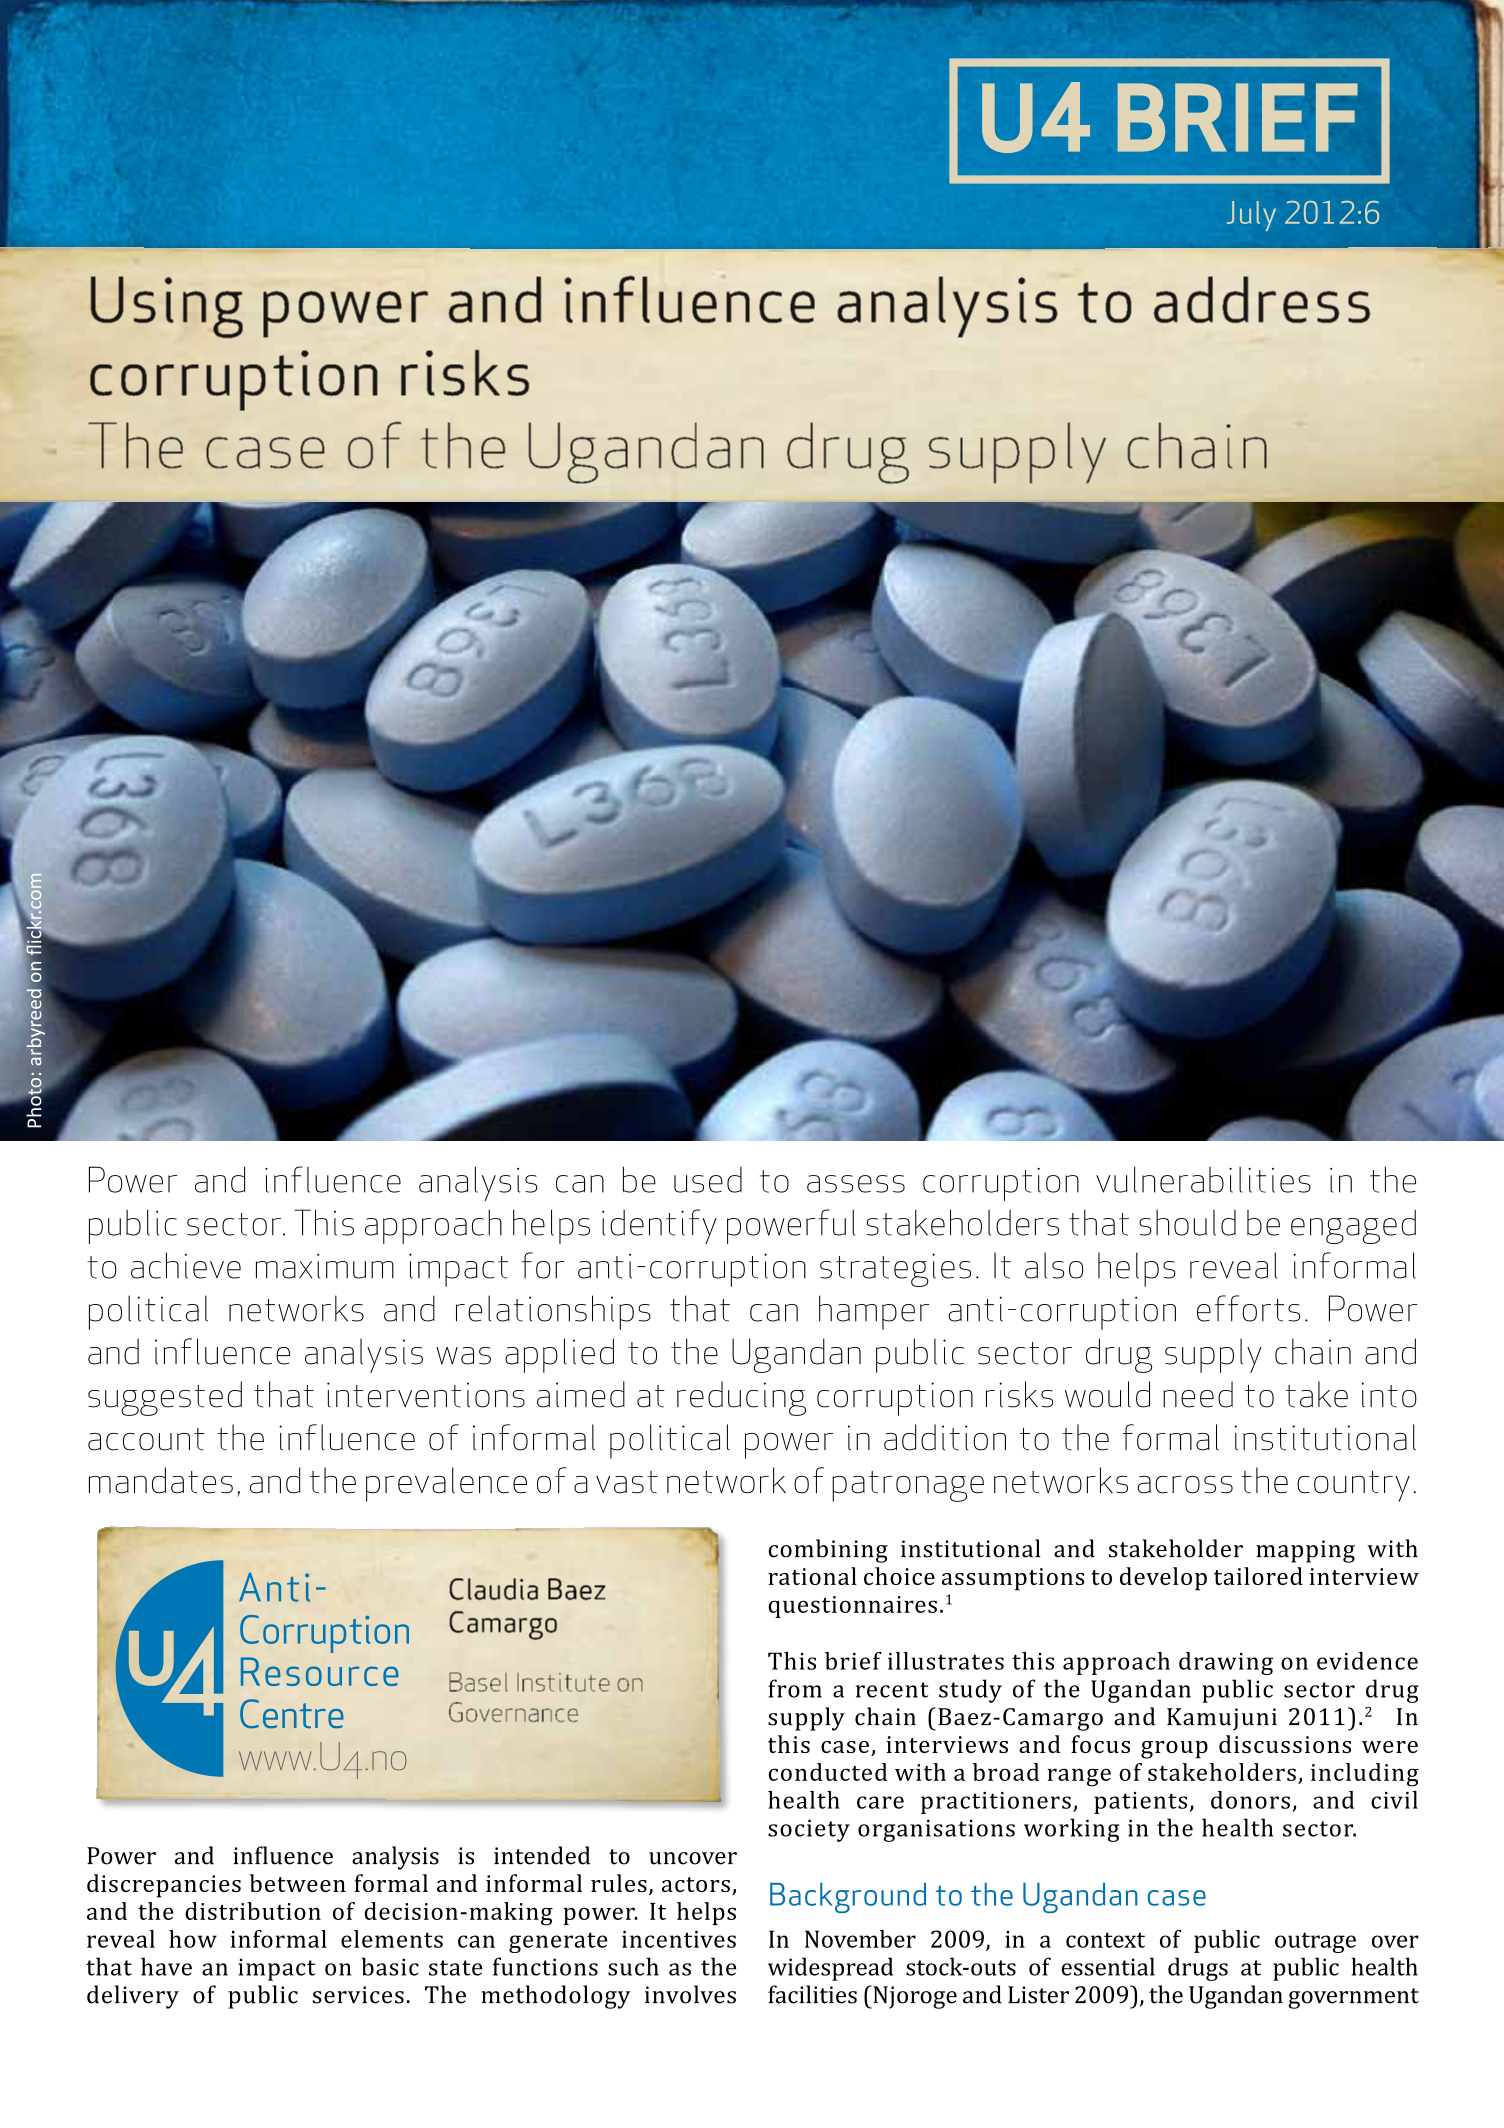 Using power and influence analysis to address corruption risks: The case of the Ugandan drug supply chain